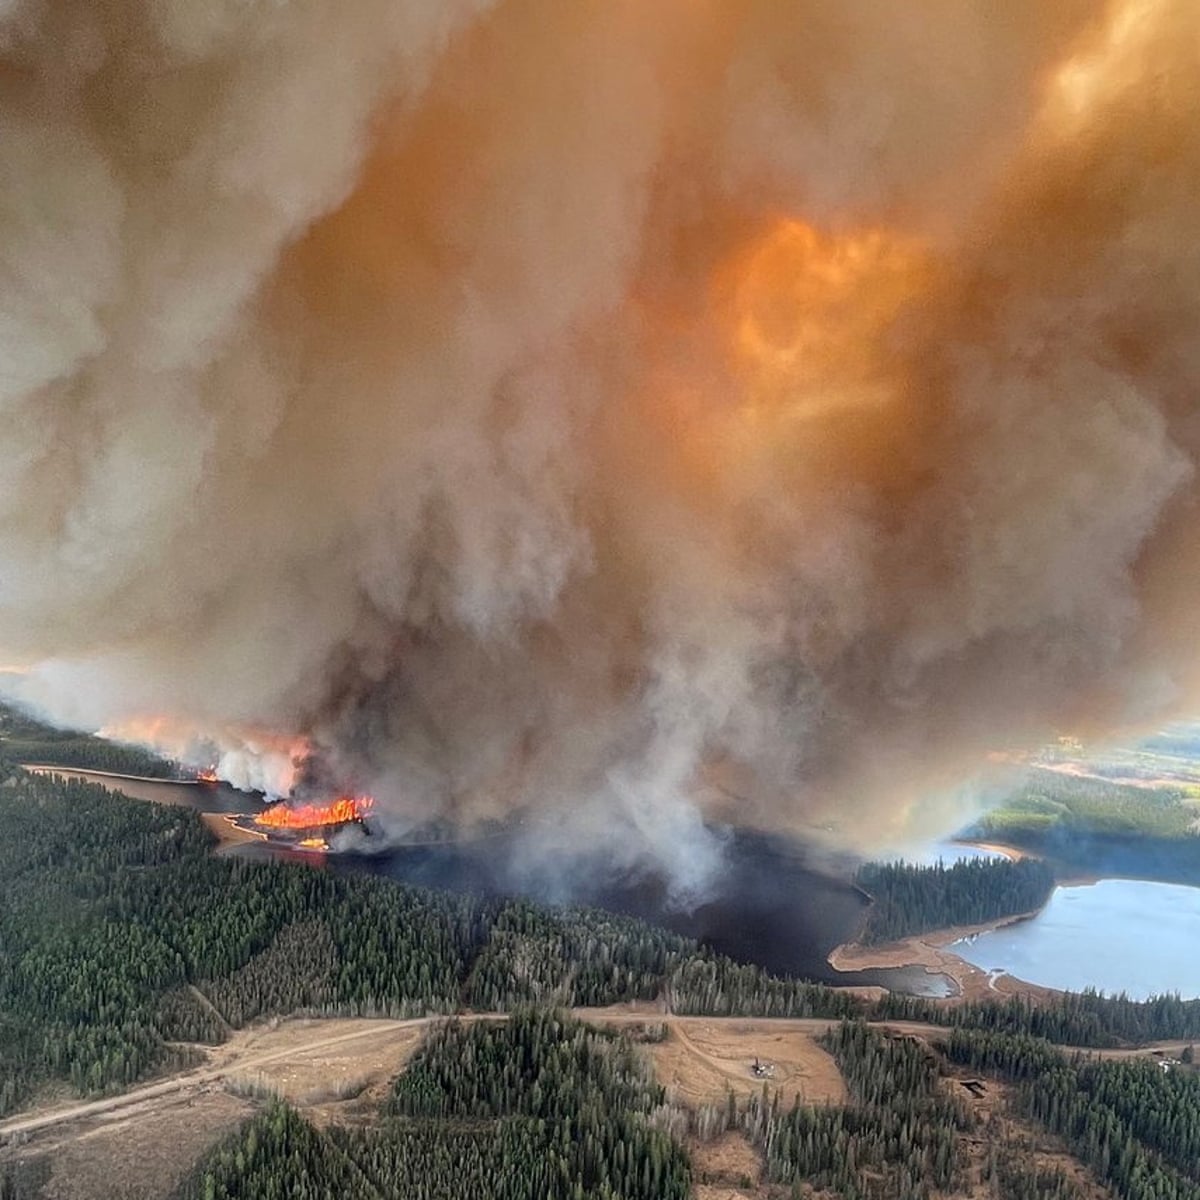 US and Canada may experience several days of continued smoky haze as wildfires rage on.